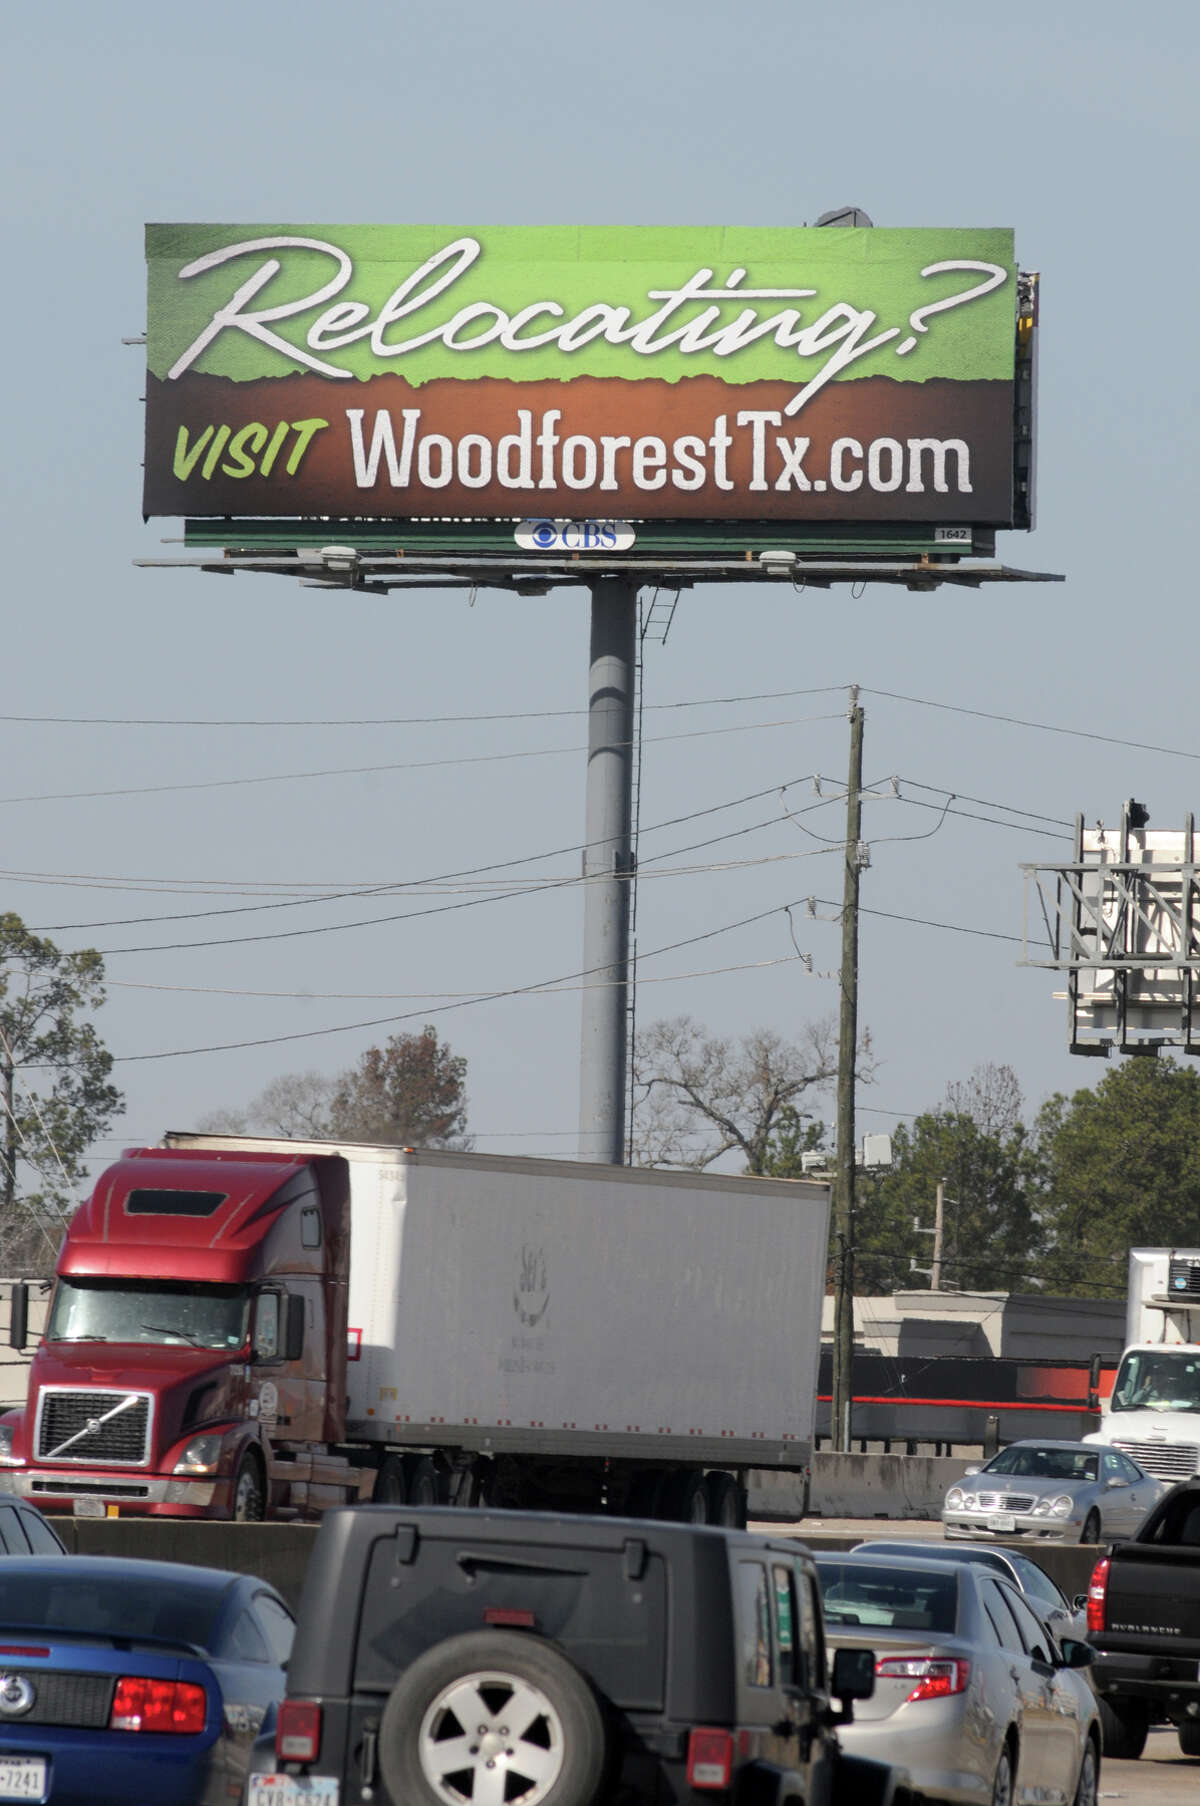 Woodforest area near The Woodlands.